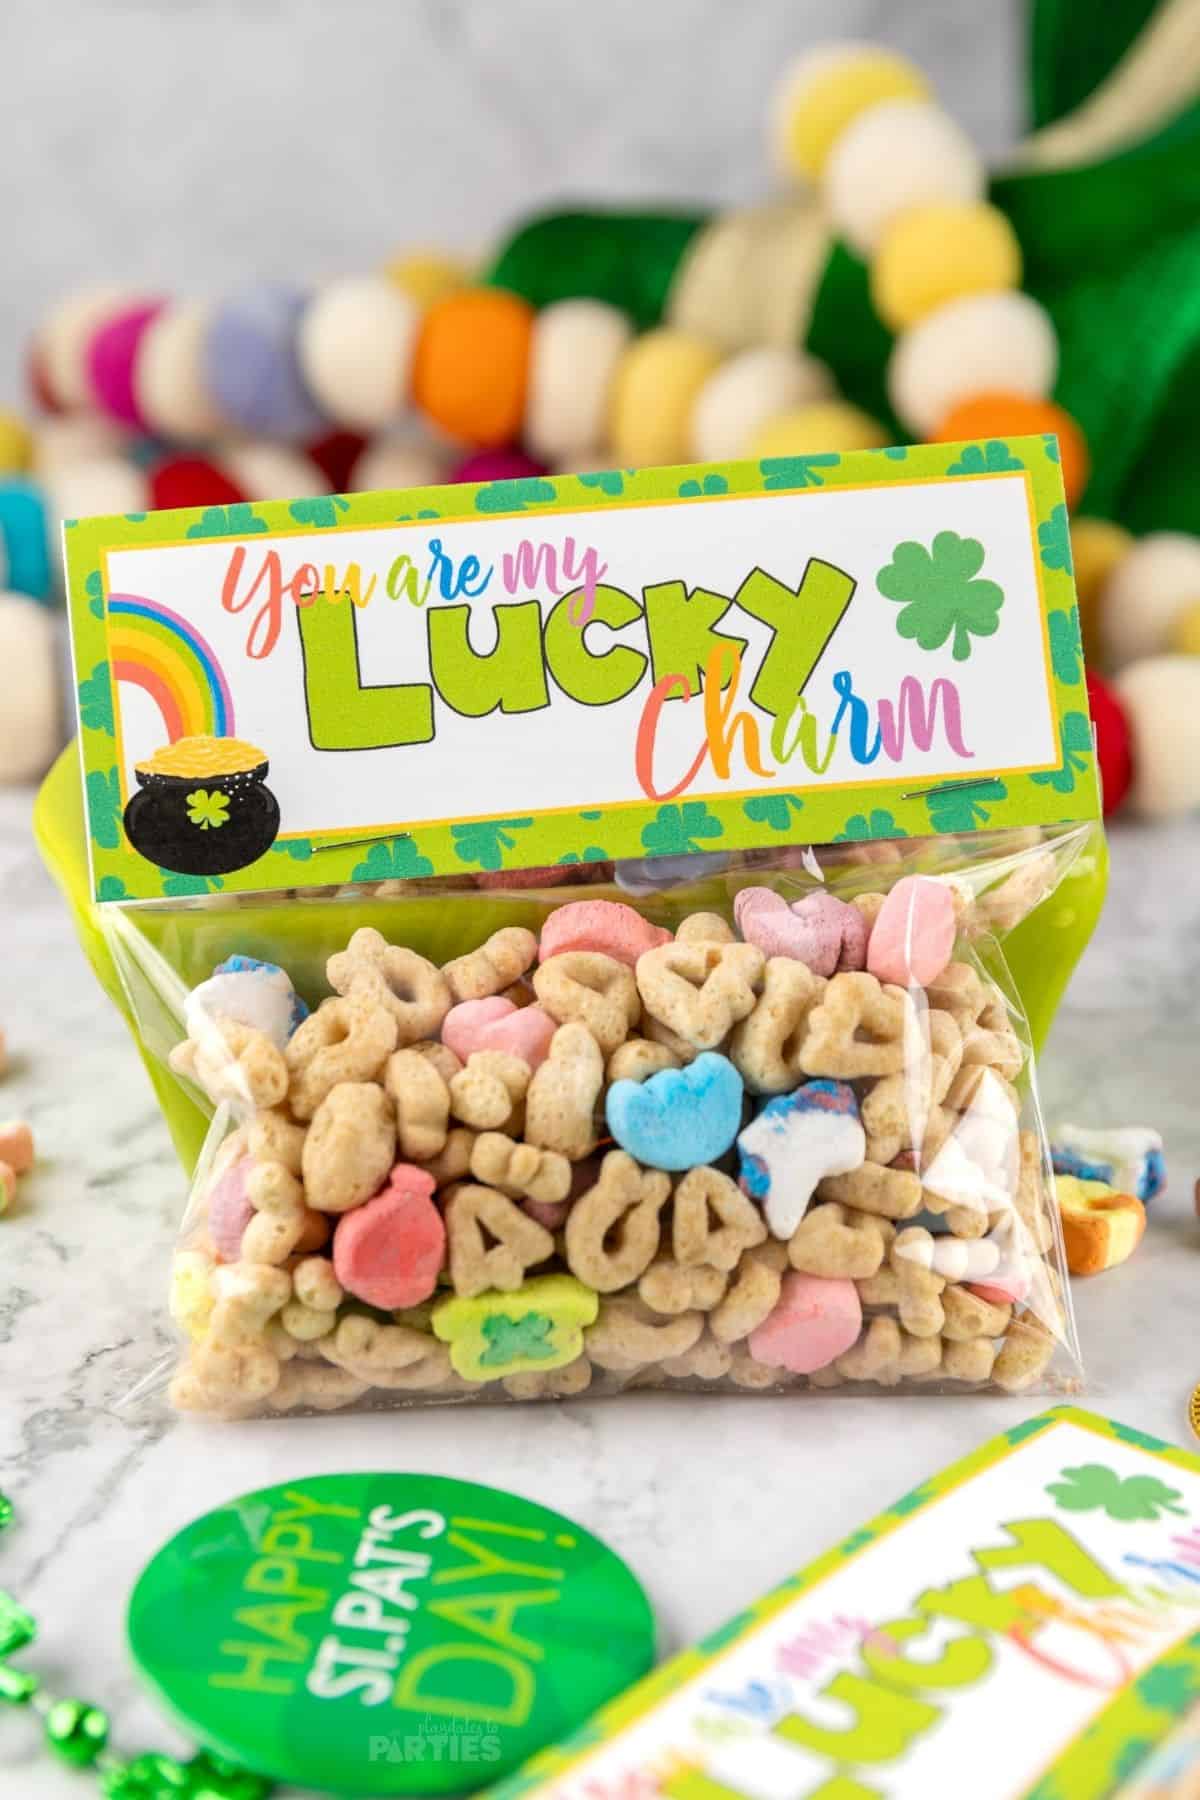 St. Patrick's Day Bag Toppers